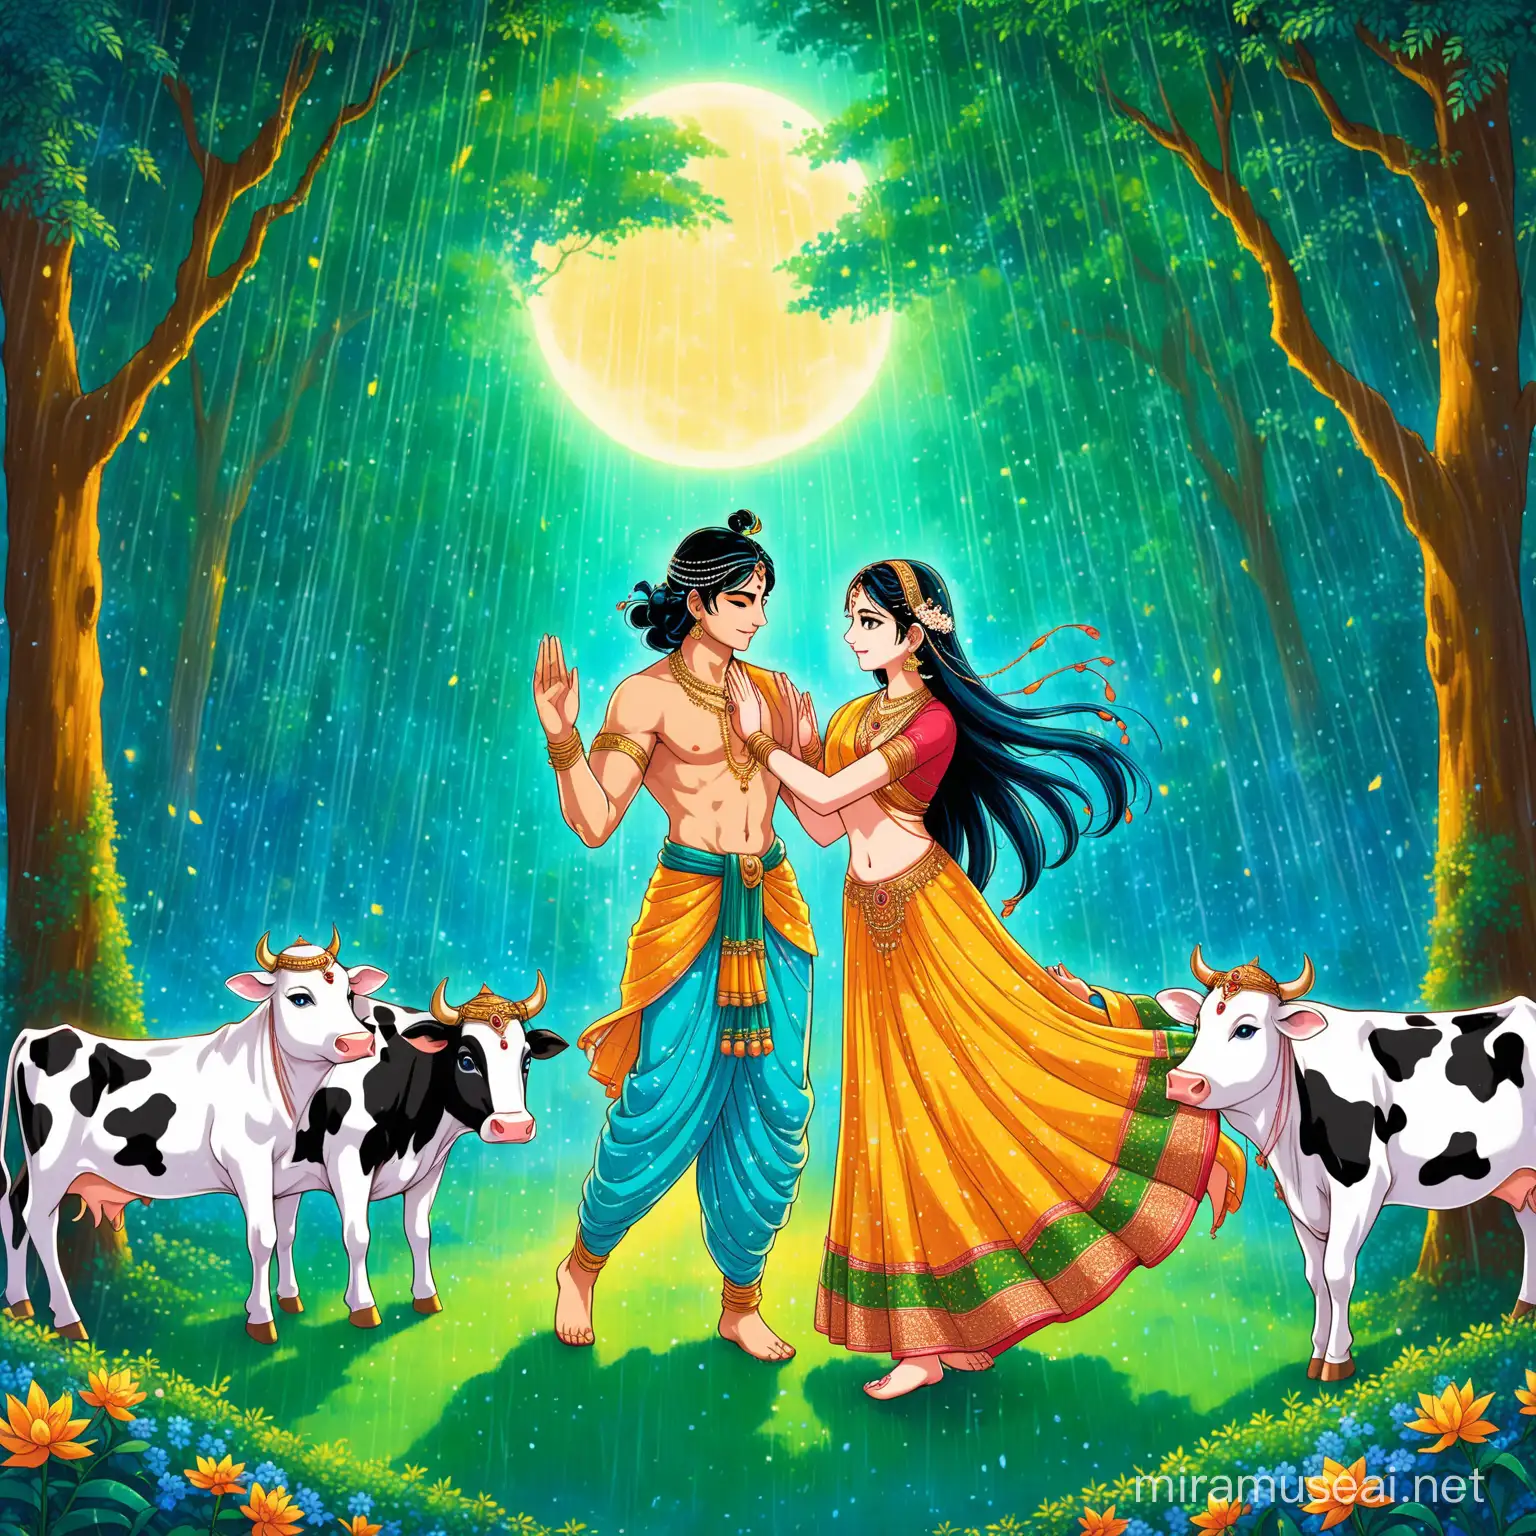 In the mystical embrace of Vrindavan's forest, Lord Krishna and radha dance,beautiful face, hindu cloths, their celestial movements weaving a tapestry of divine love under the shimmering moonlight. Amidst the fragrance of flowers and the rustle of leaves, their eternal bond unfolds in a symphony of transcendent beauty , ghibli anime style, hand drawn, raining, cows